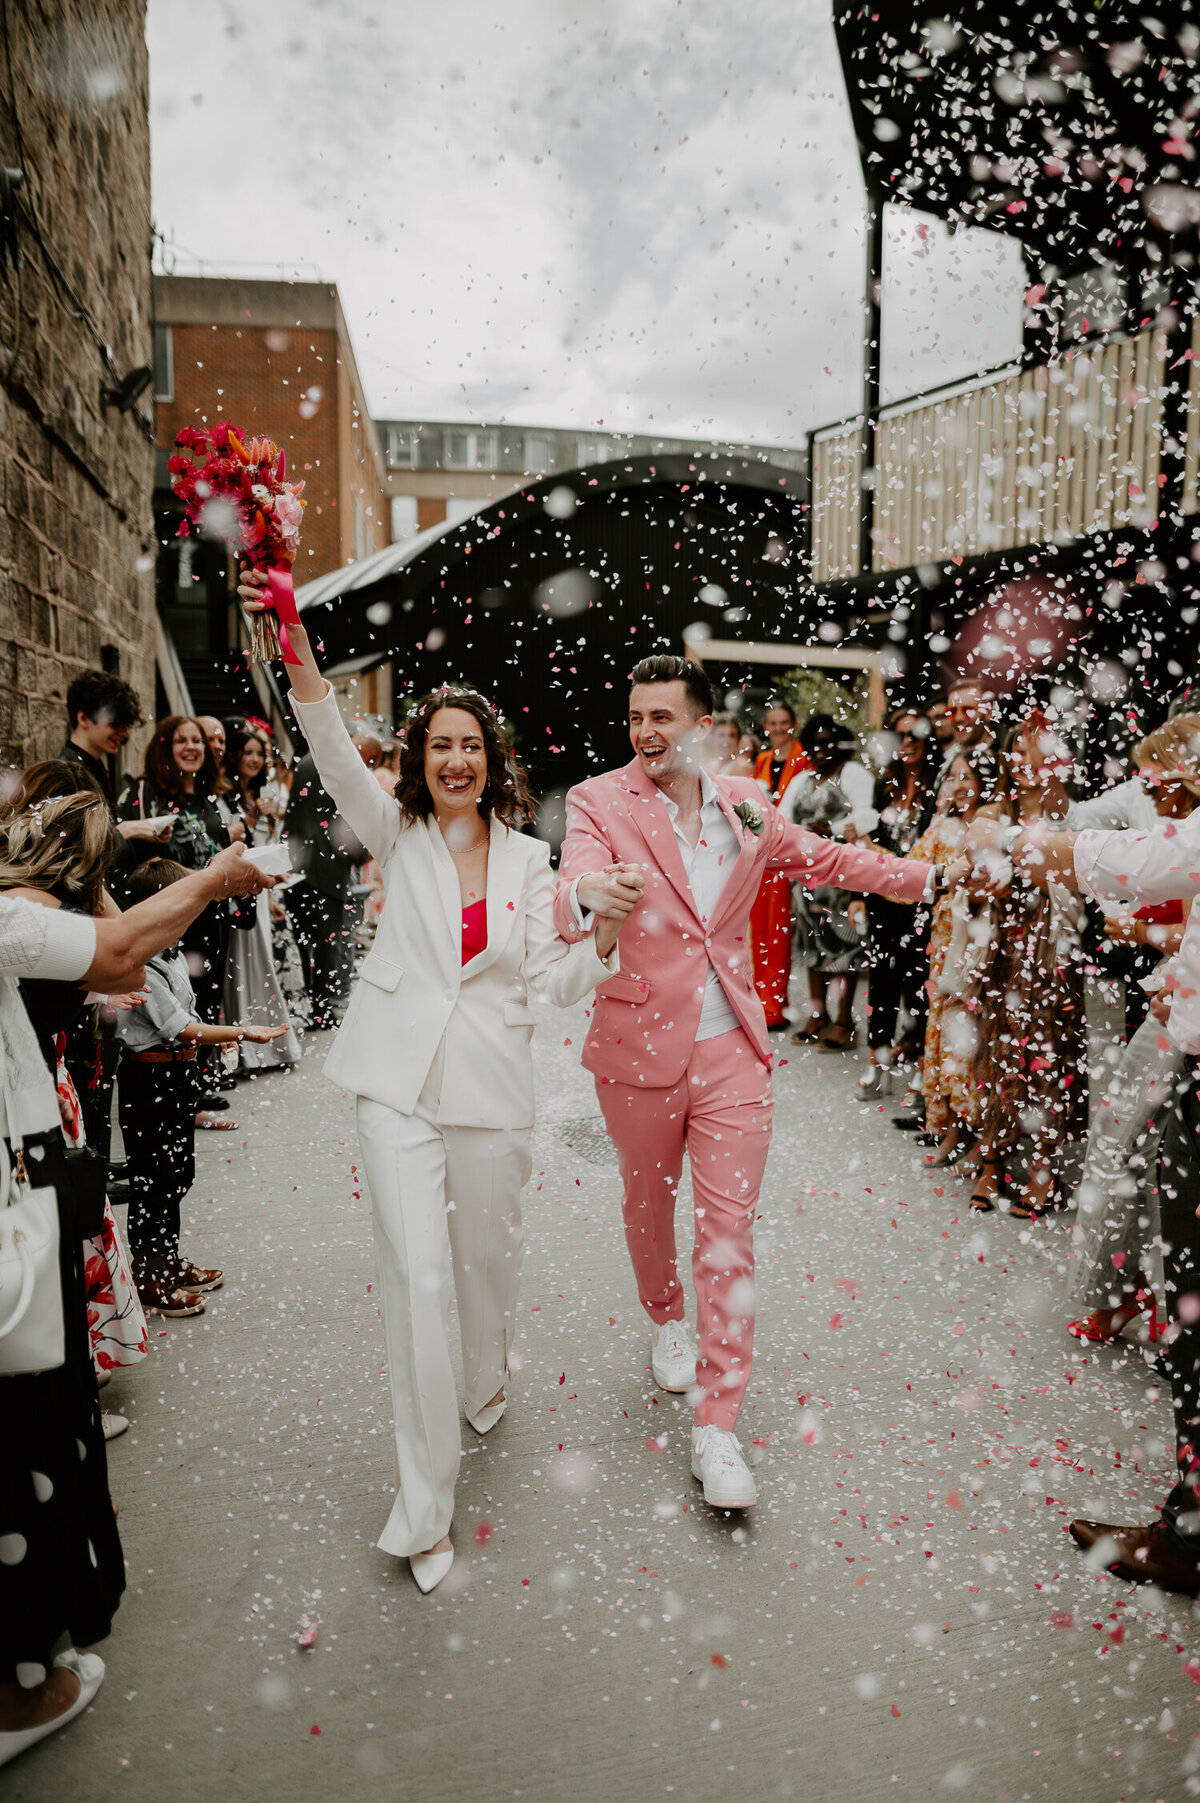 A bride and groom are showered by confetti as they exit their ceremony at The Shack Revolution.